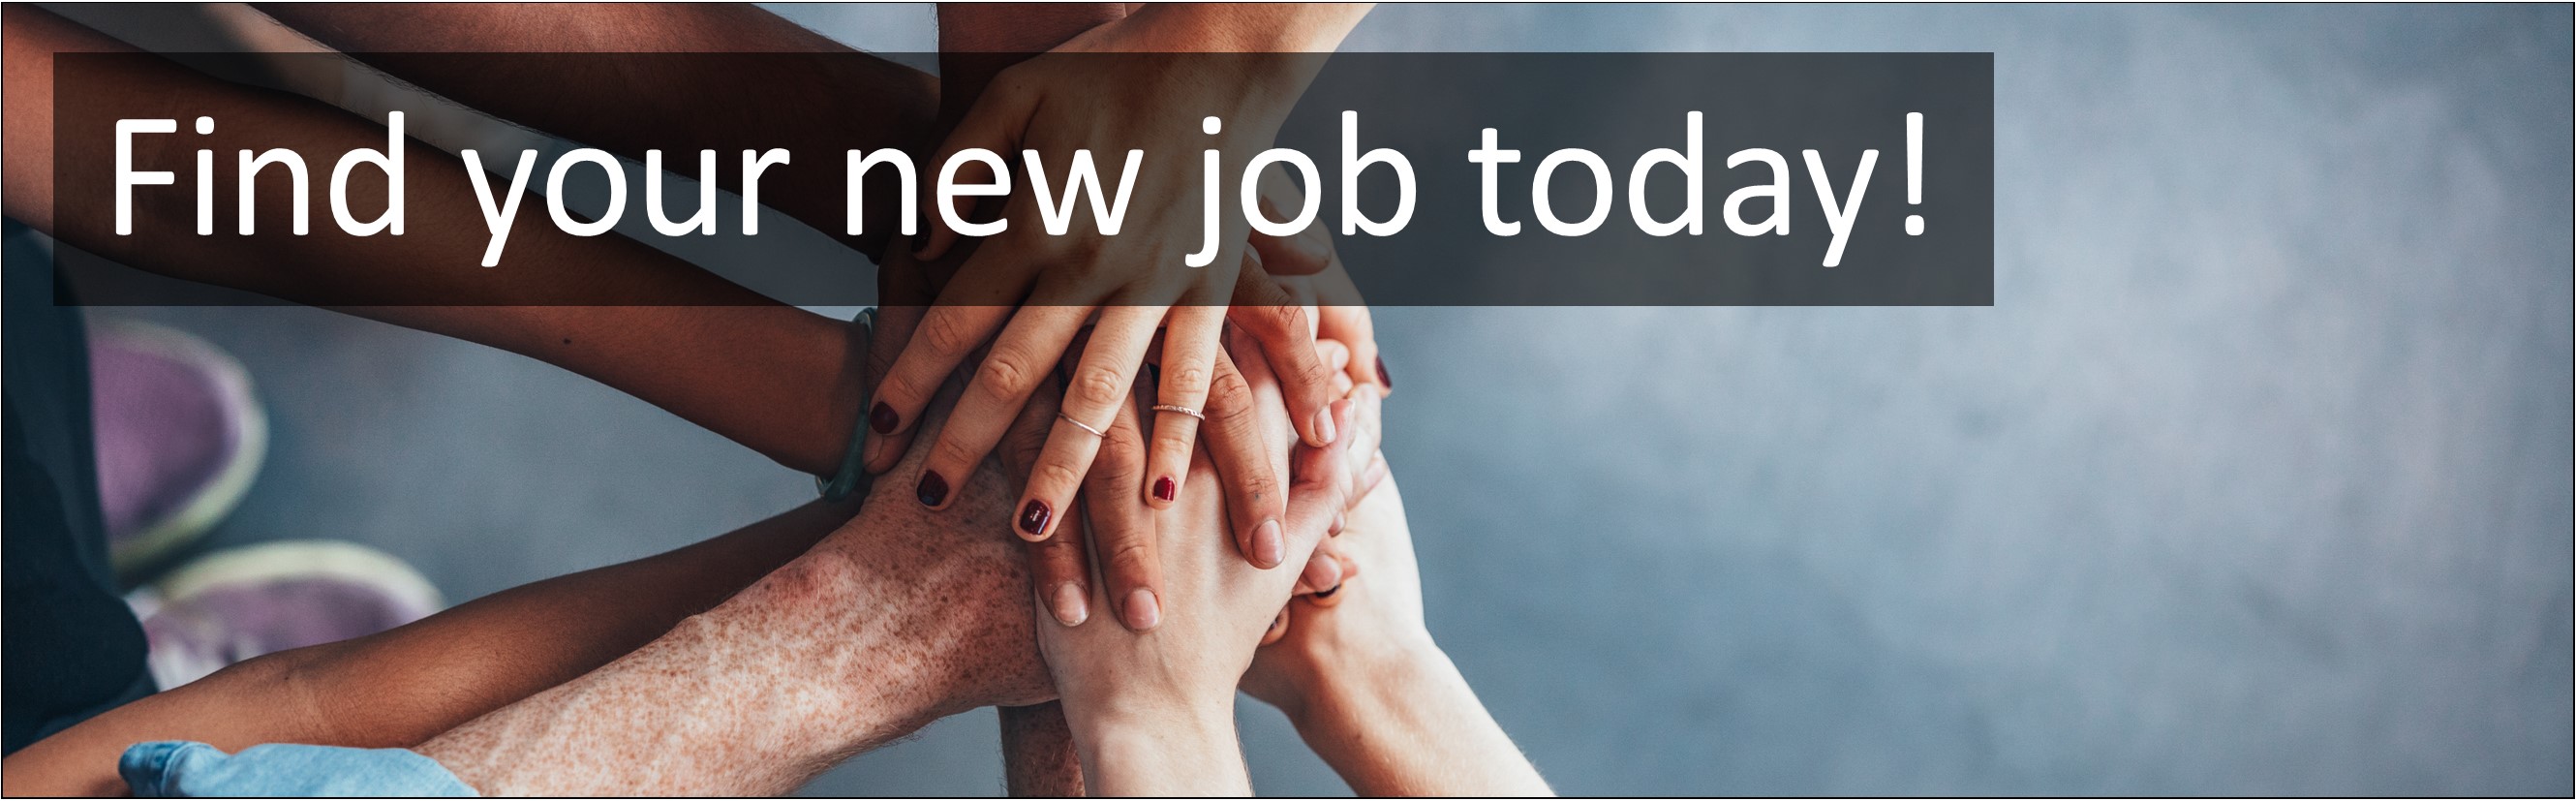 Social Care Jobs. Programme Officer / Education / Government Jobs, Careers & Vacancies in Newport, Monmouthshire, Wales Advertised by AWD online – Multi-Job Board Advertising and CV Sourcing Recruitment Services